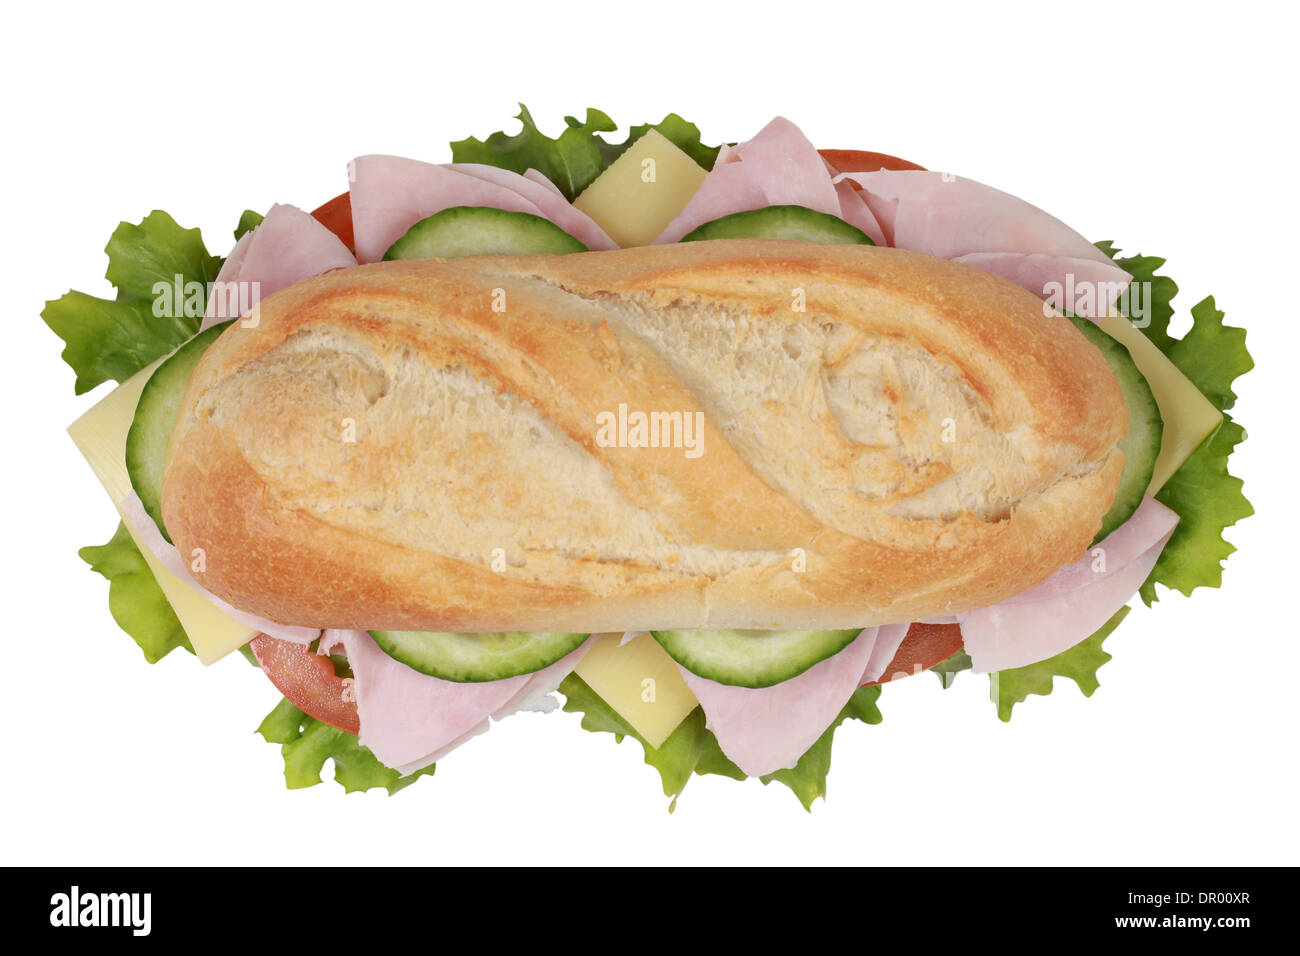 Lettuce with cucumber Cut Out Stock Images & Pictures - Alamy